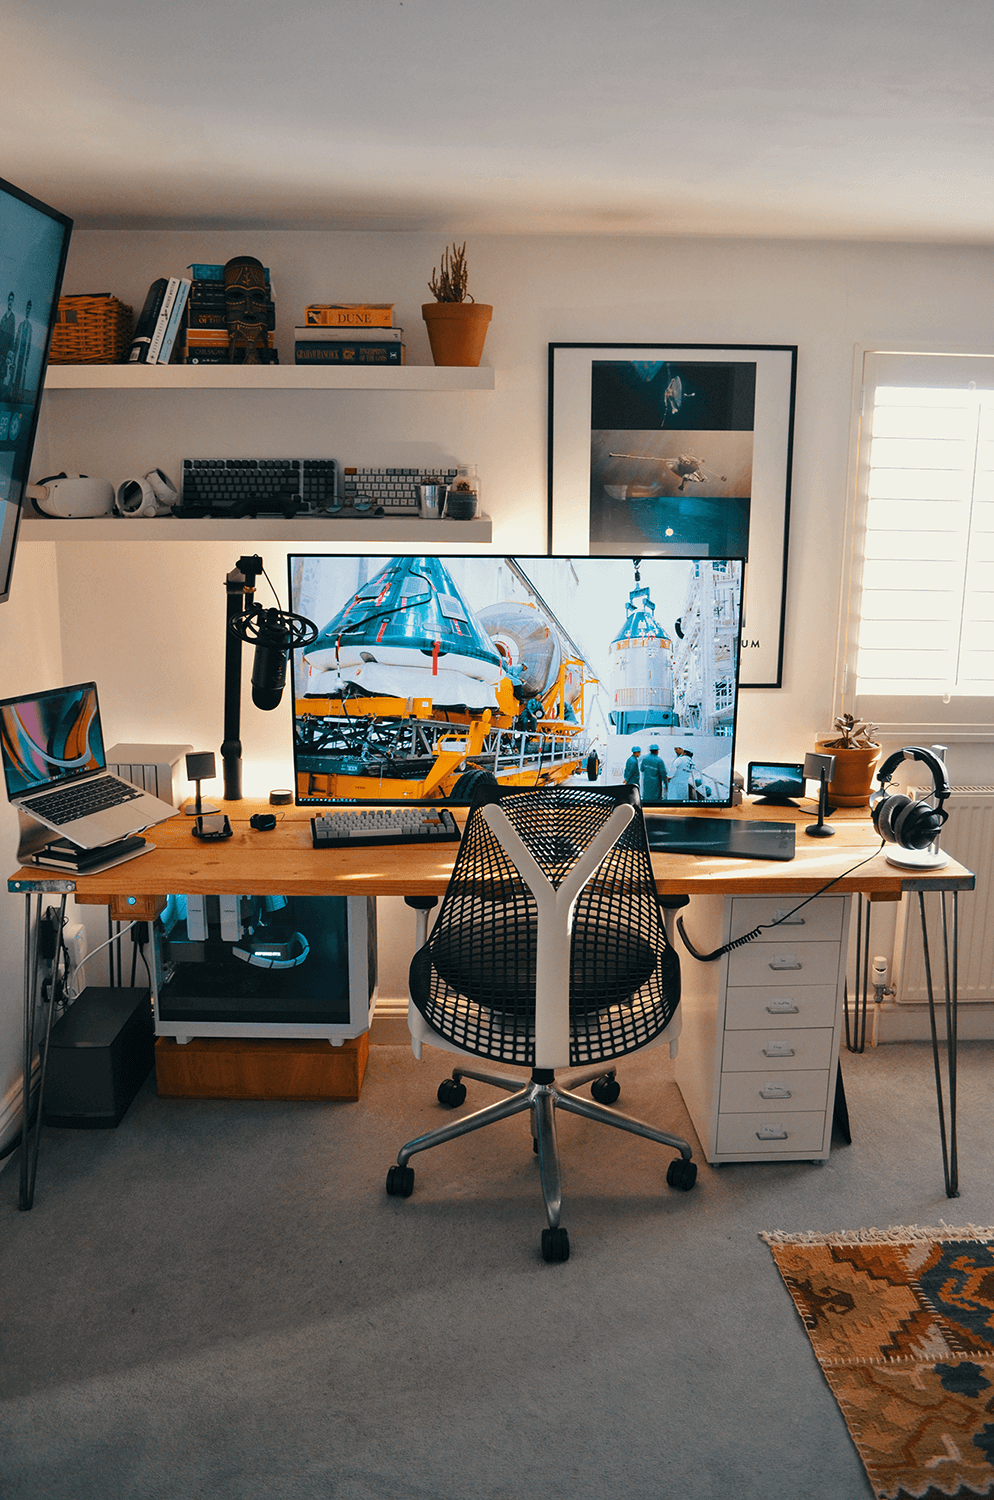 James’ living room and his home office setup in the UK